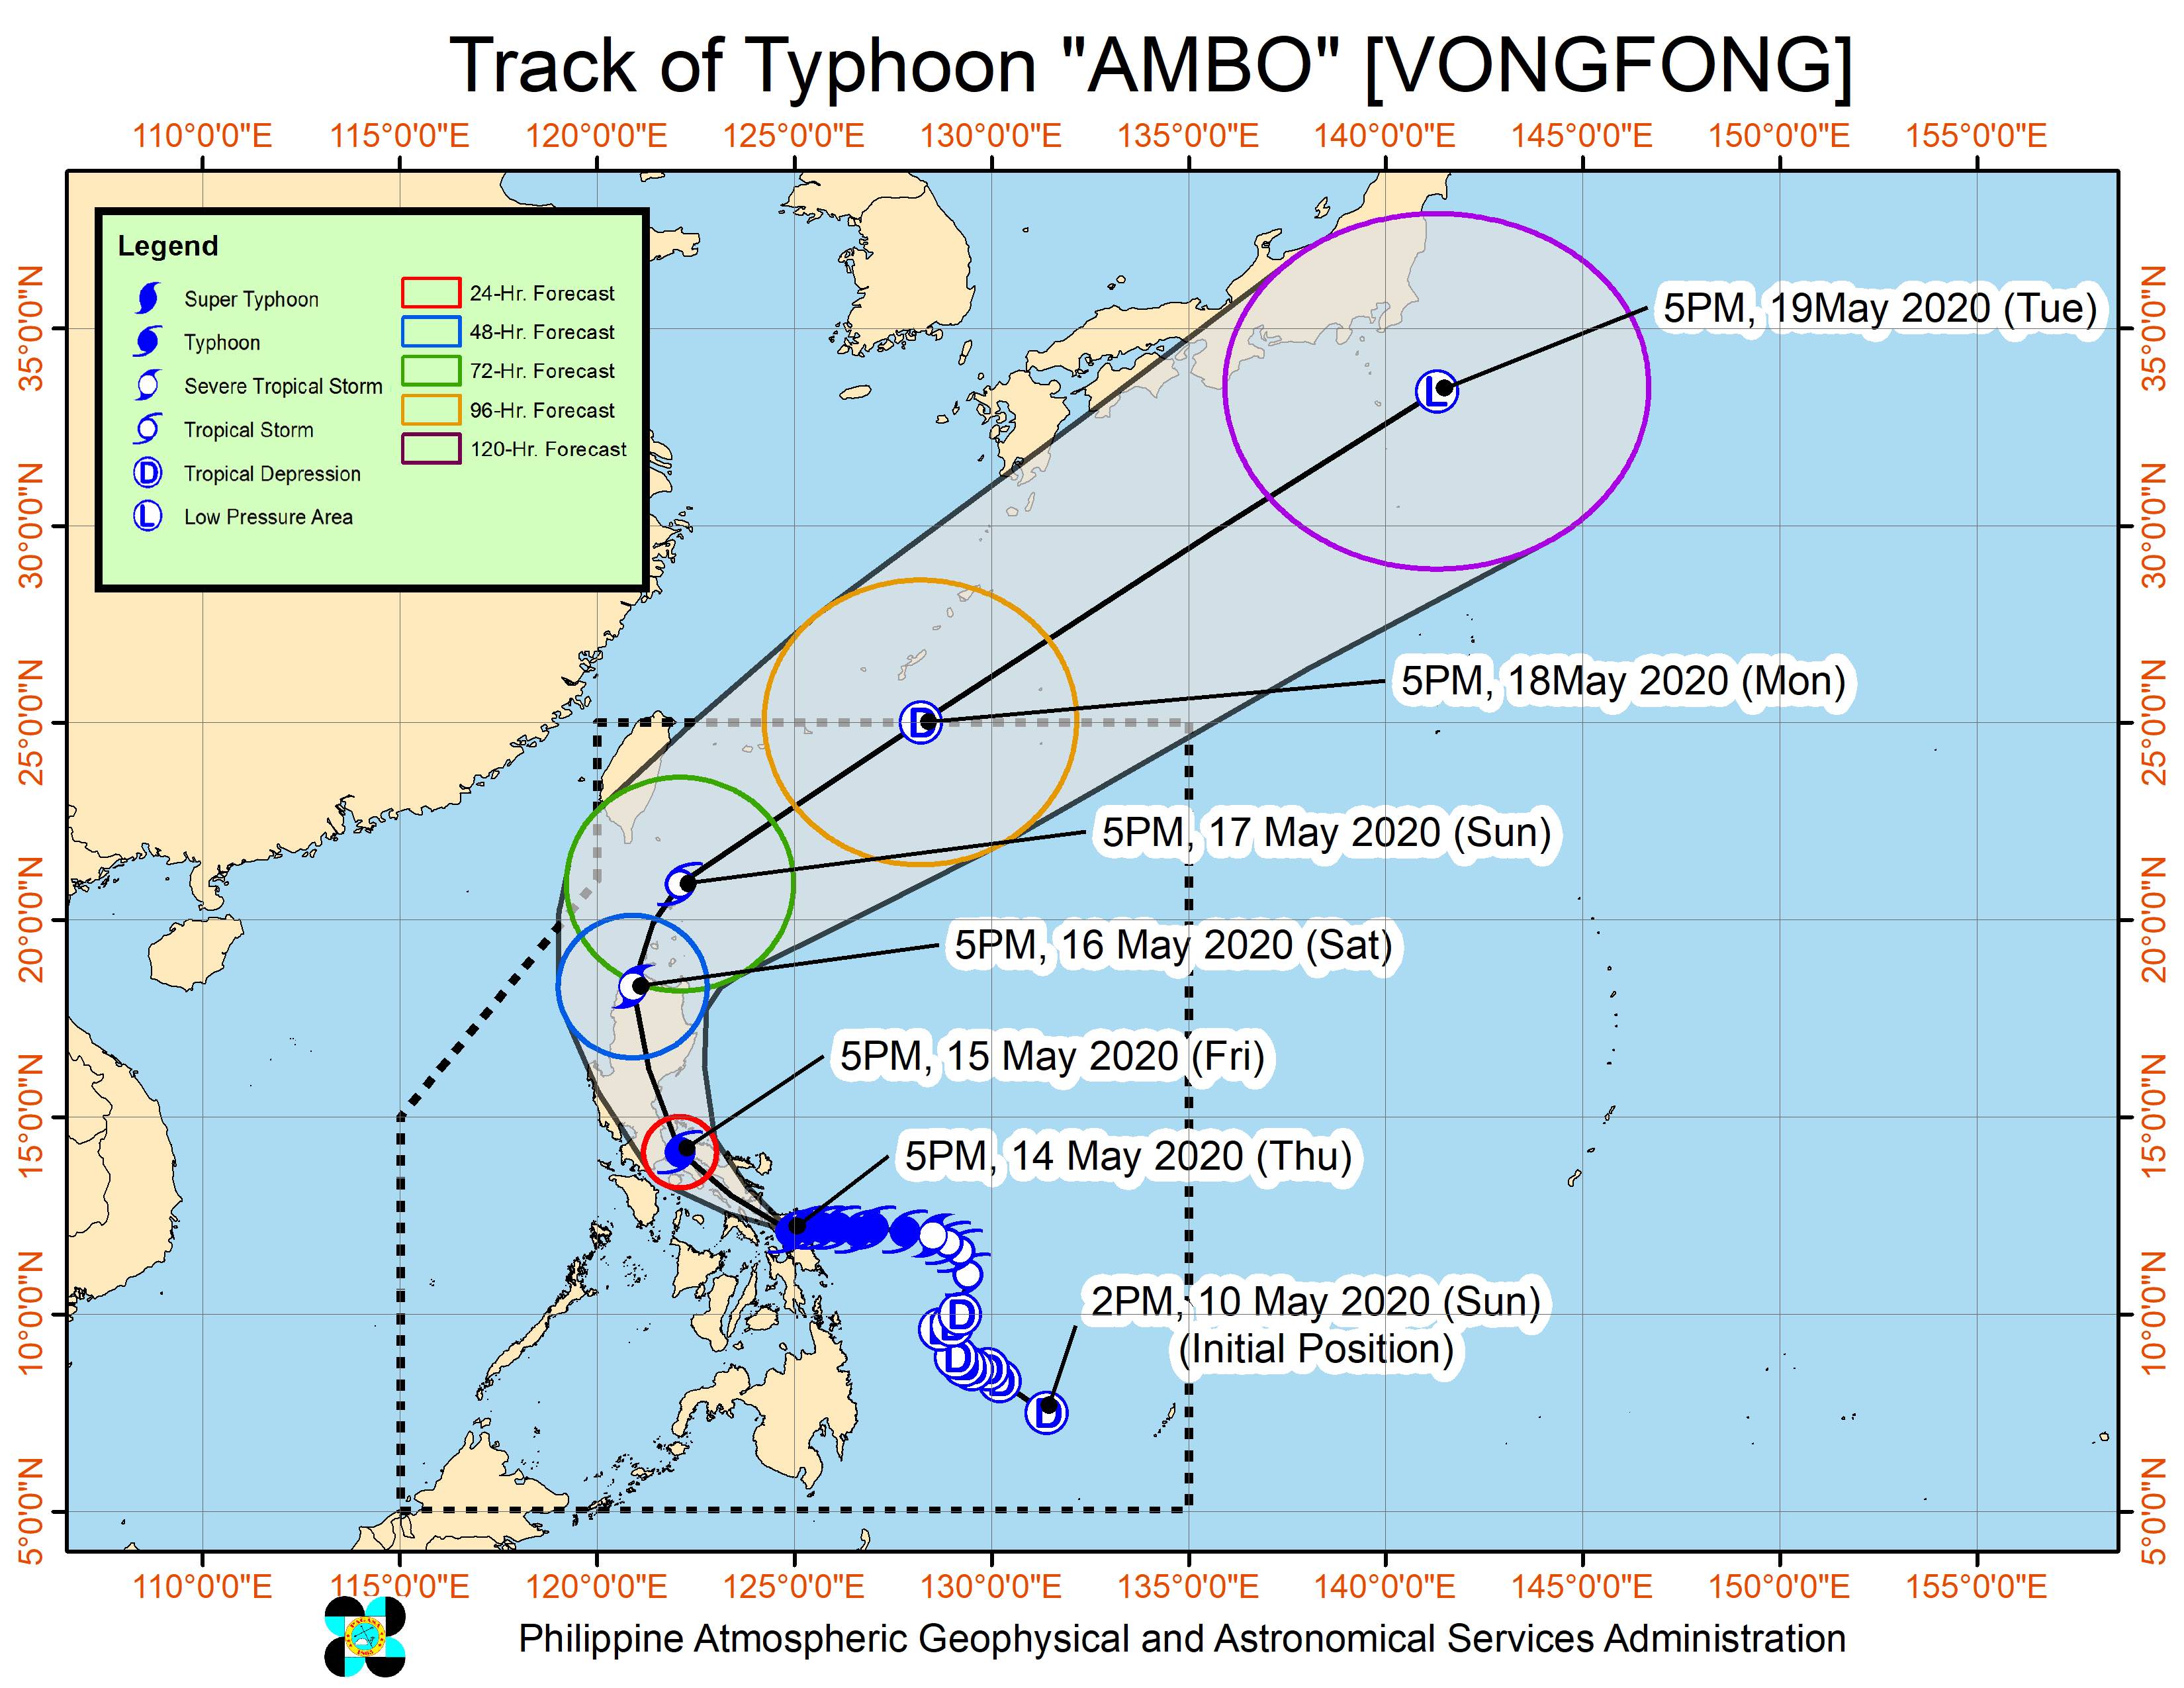 Forecast track of Typhoon Ambo (Vongfong) as of May 14, 2020, 8 pm. Image from PAGASA 